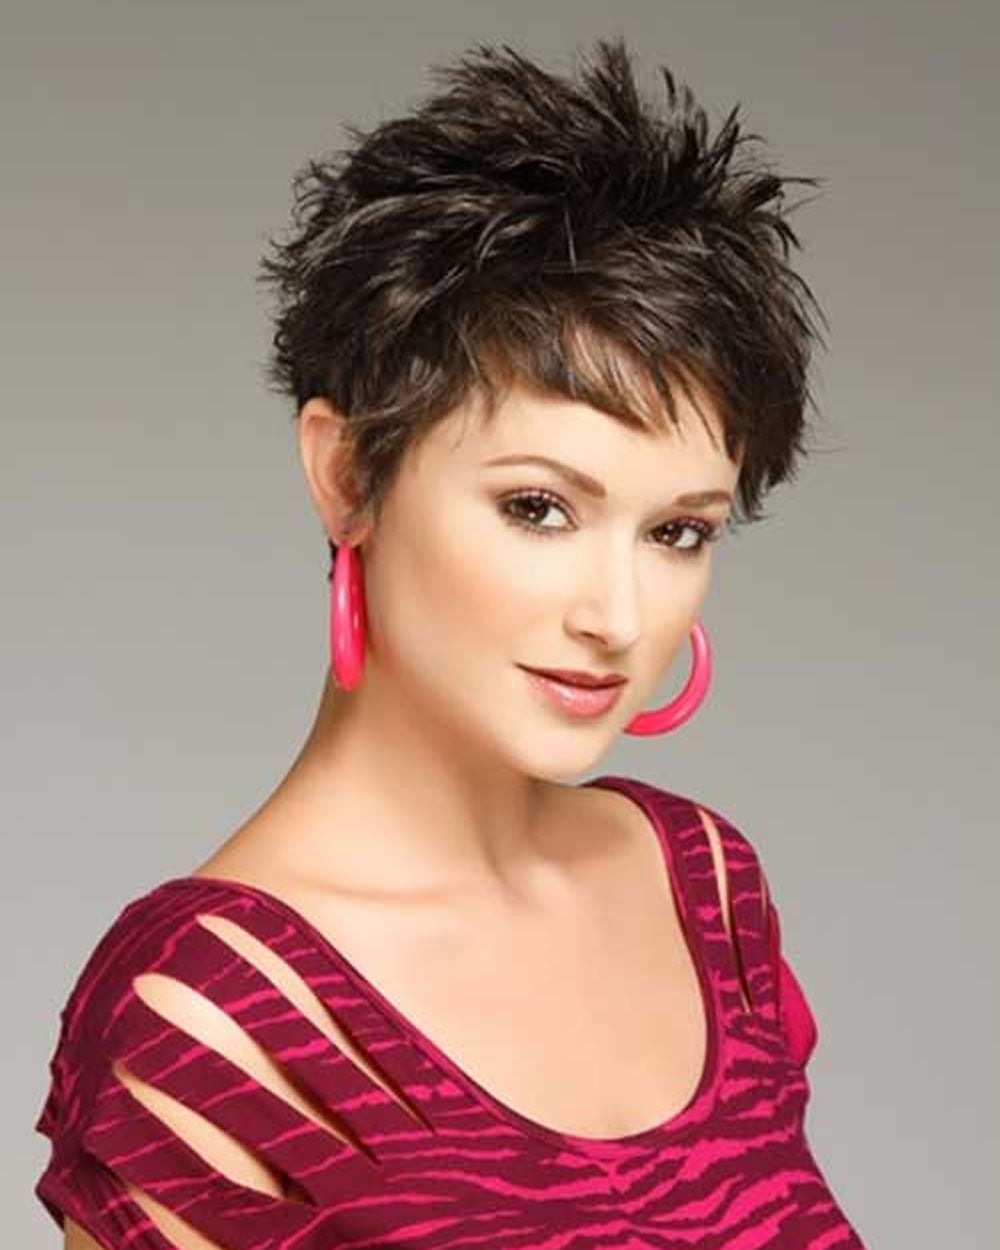 Hairstyles For Women Over 60 Spiky Short Hairstyles Haircuts For ...